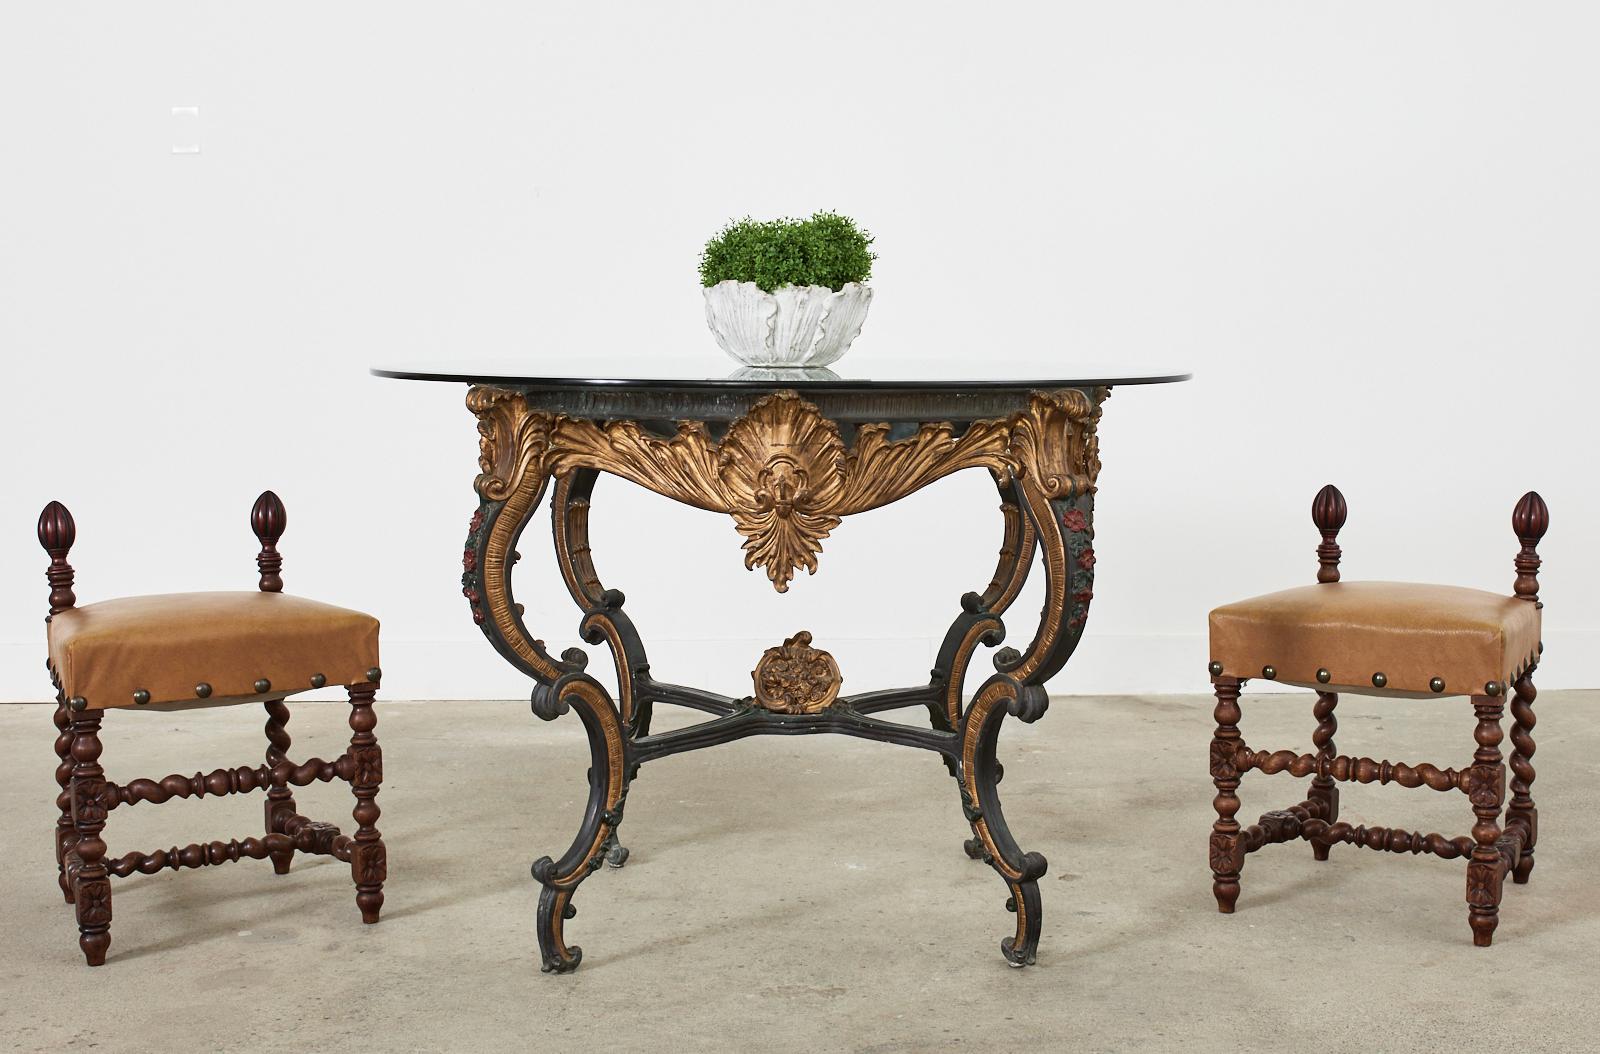 Opulent Italian solid bronze gueridon or center table made in the grand Baroque taste. The table features a lacquered parcel gilt finish with a desirable aged patina. Each side is centered with a large cartouche embellished with gilt acanthus sprays